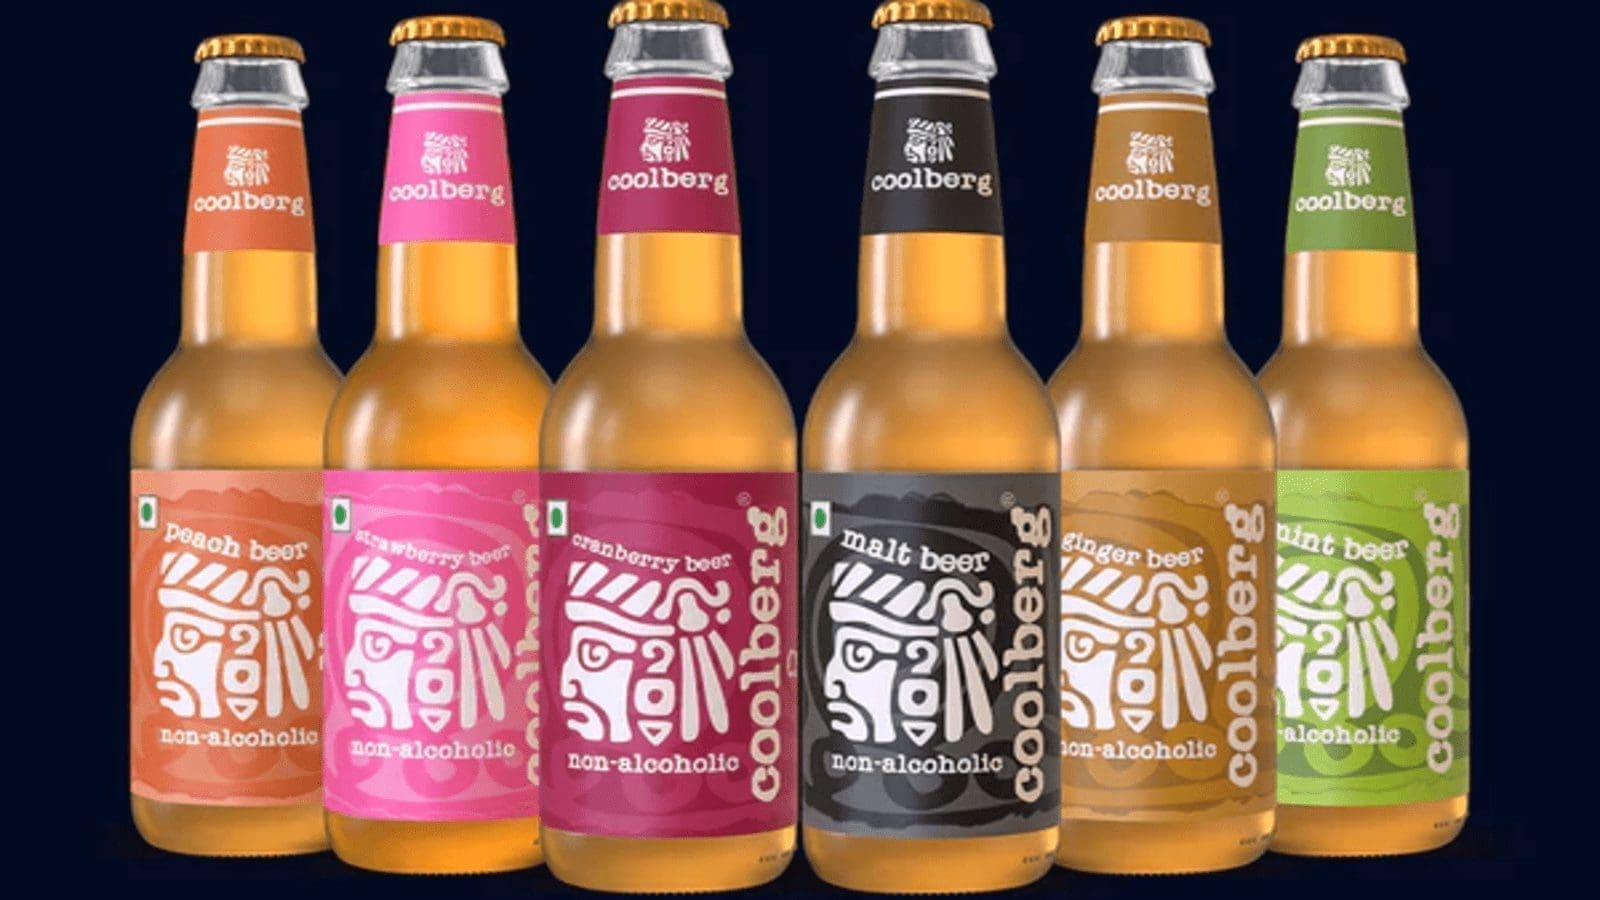 Ghodawat Consumer Limited snaps up India’s fastest-growing non-alcoholic beverages maker Coolberg